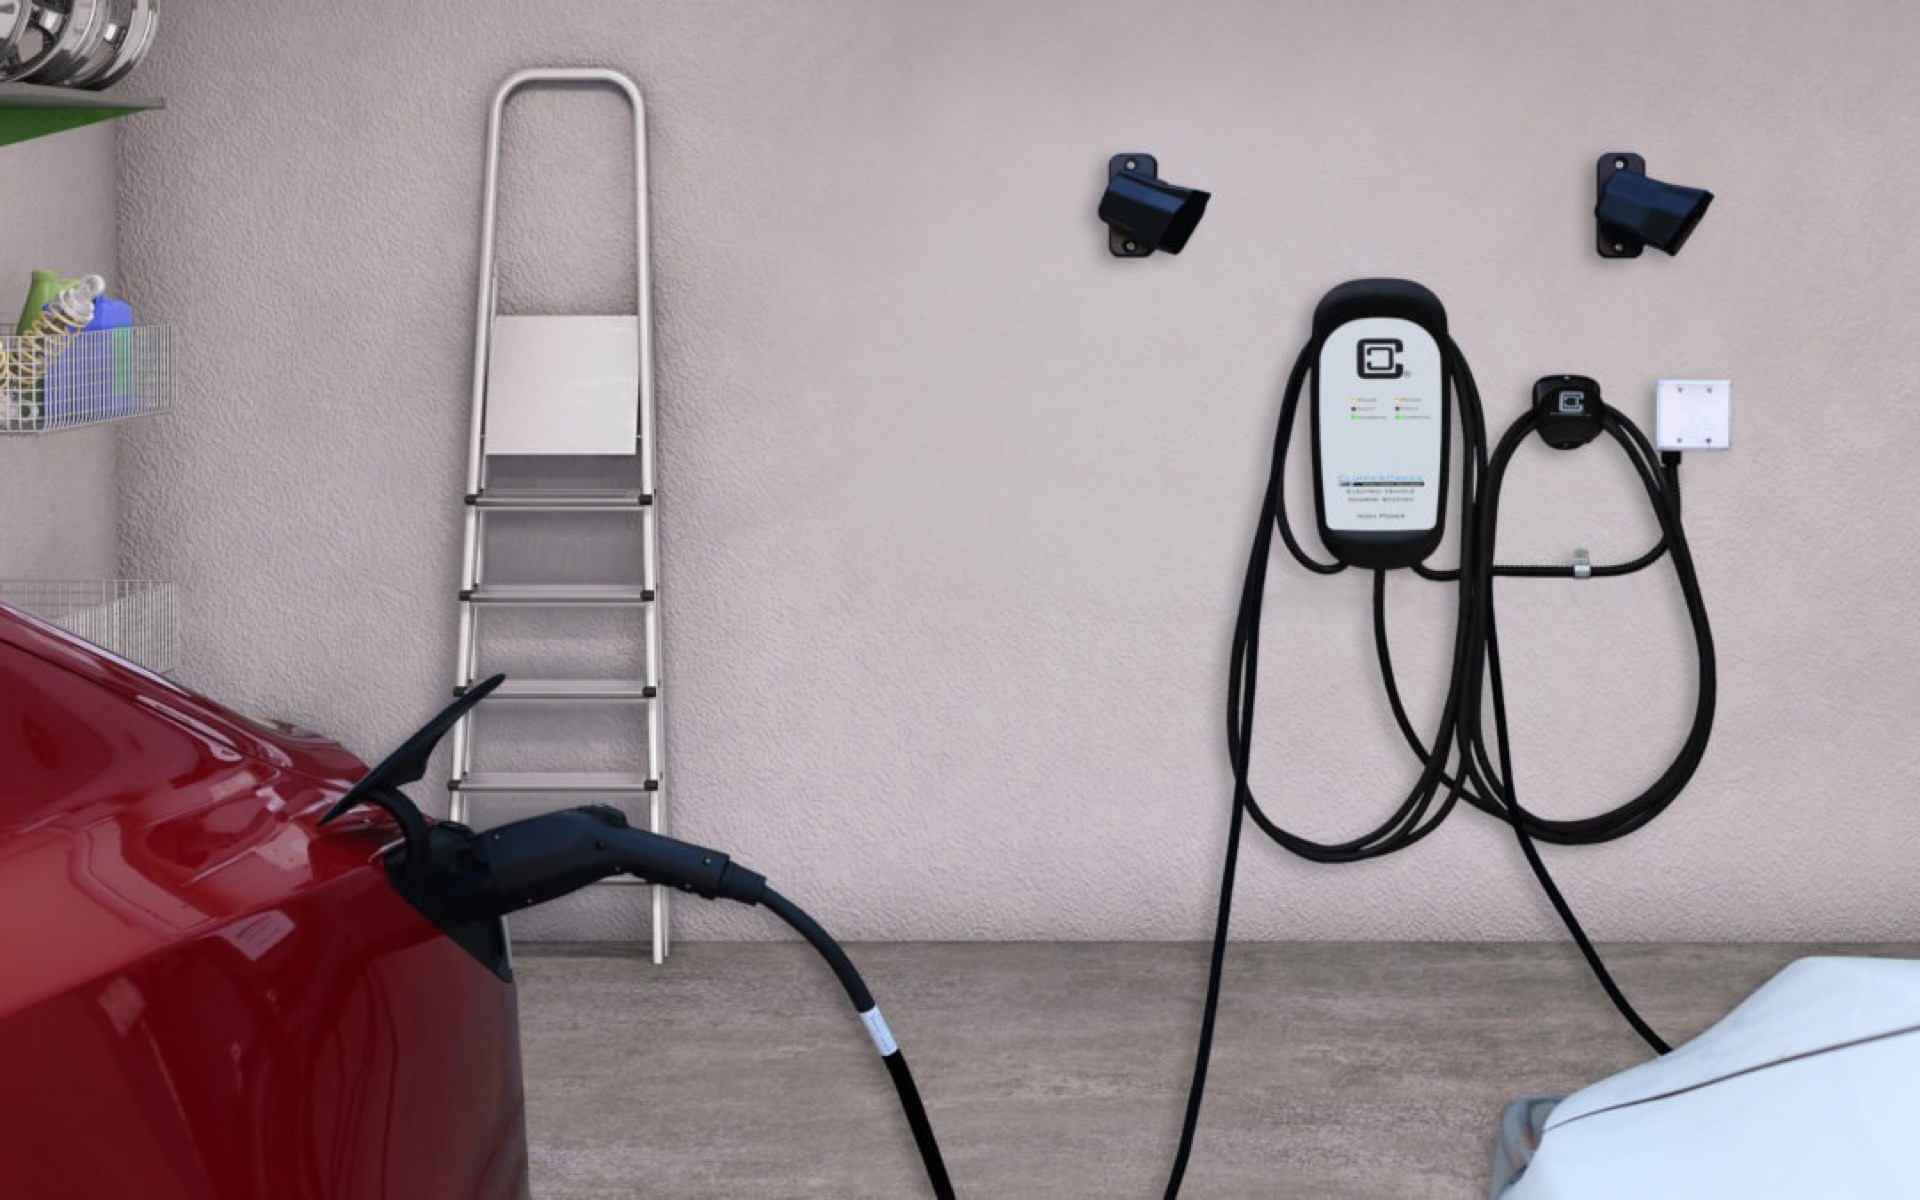 California leads in home EV charger installation, while NYC is last